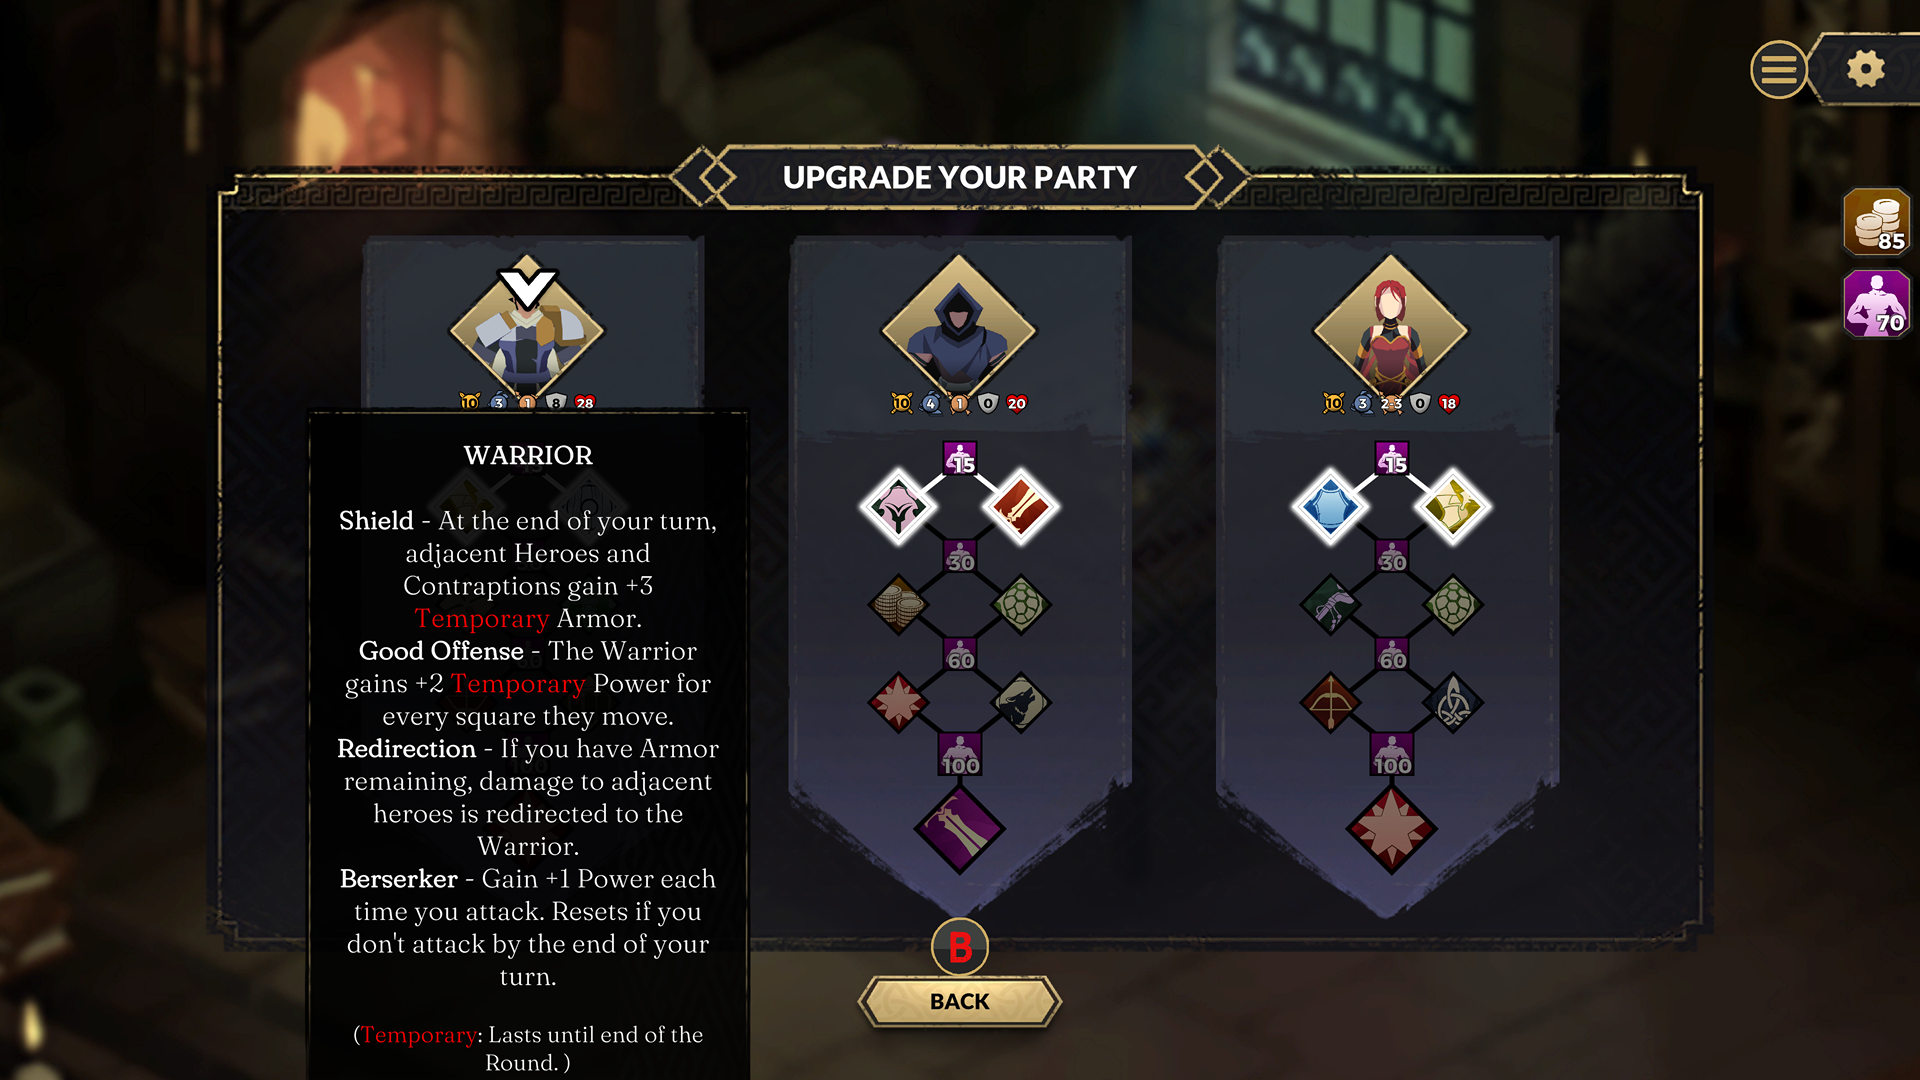 Upgrade your party screen. Three columns representing your three heroes. Each hero has a skill tree that can be advanced going down the column.